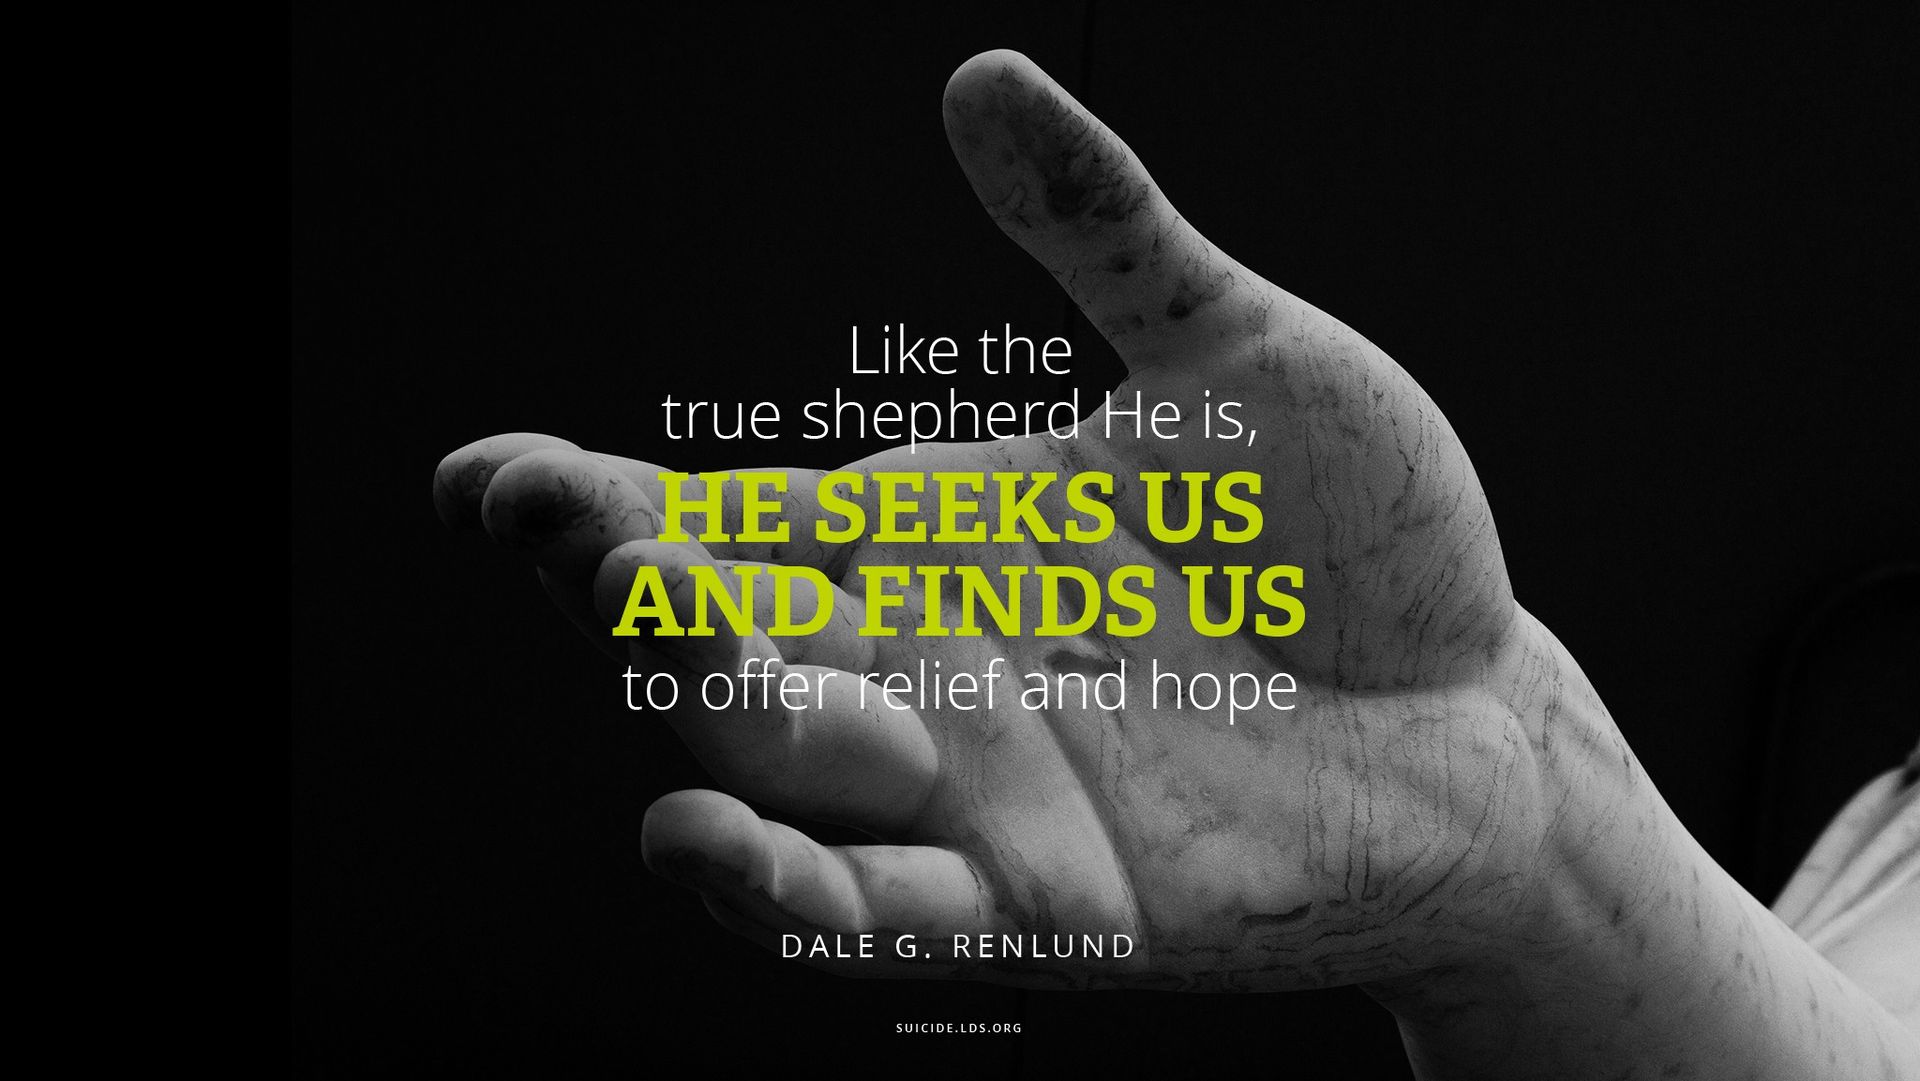 “Like the true shepherd He is, He seeks us and finds us to offer relief and hope.”—Elder Dale G. Renlund, “Our Good Shepherd”